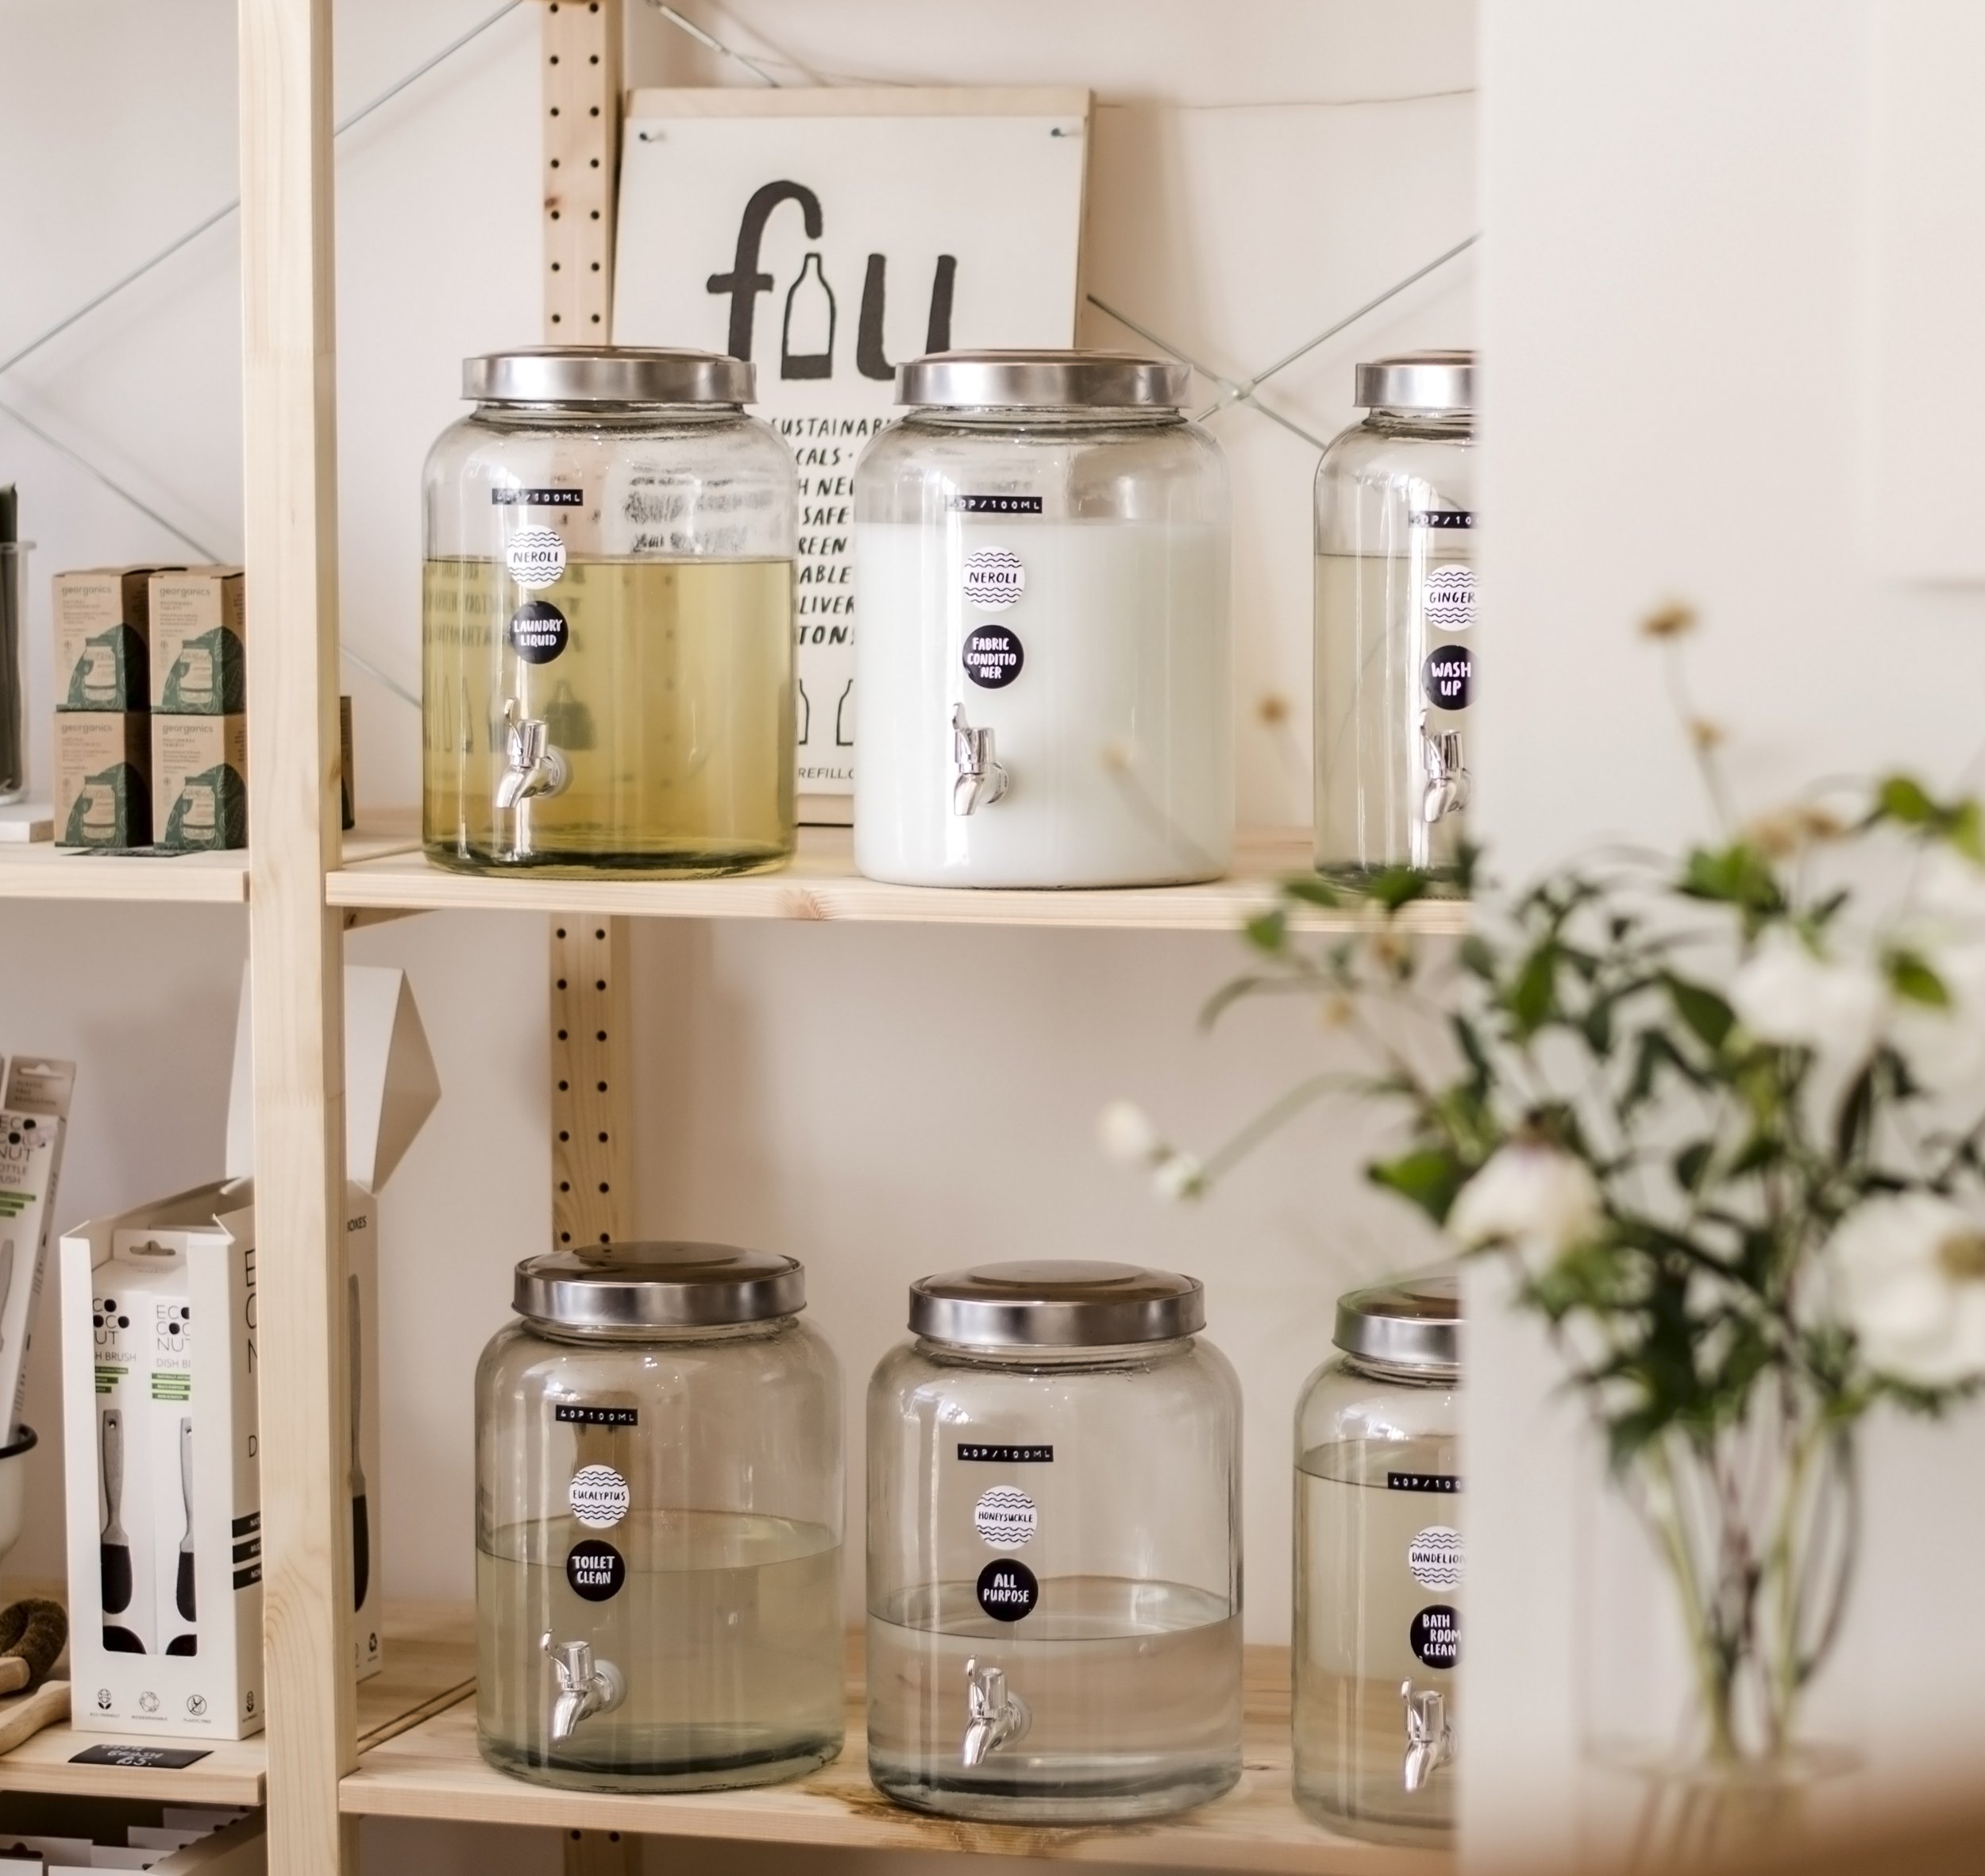 Dispensers in Something Good, a zero waste store in Newscastle